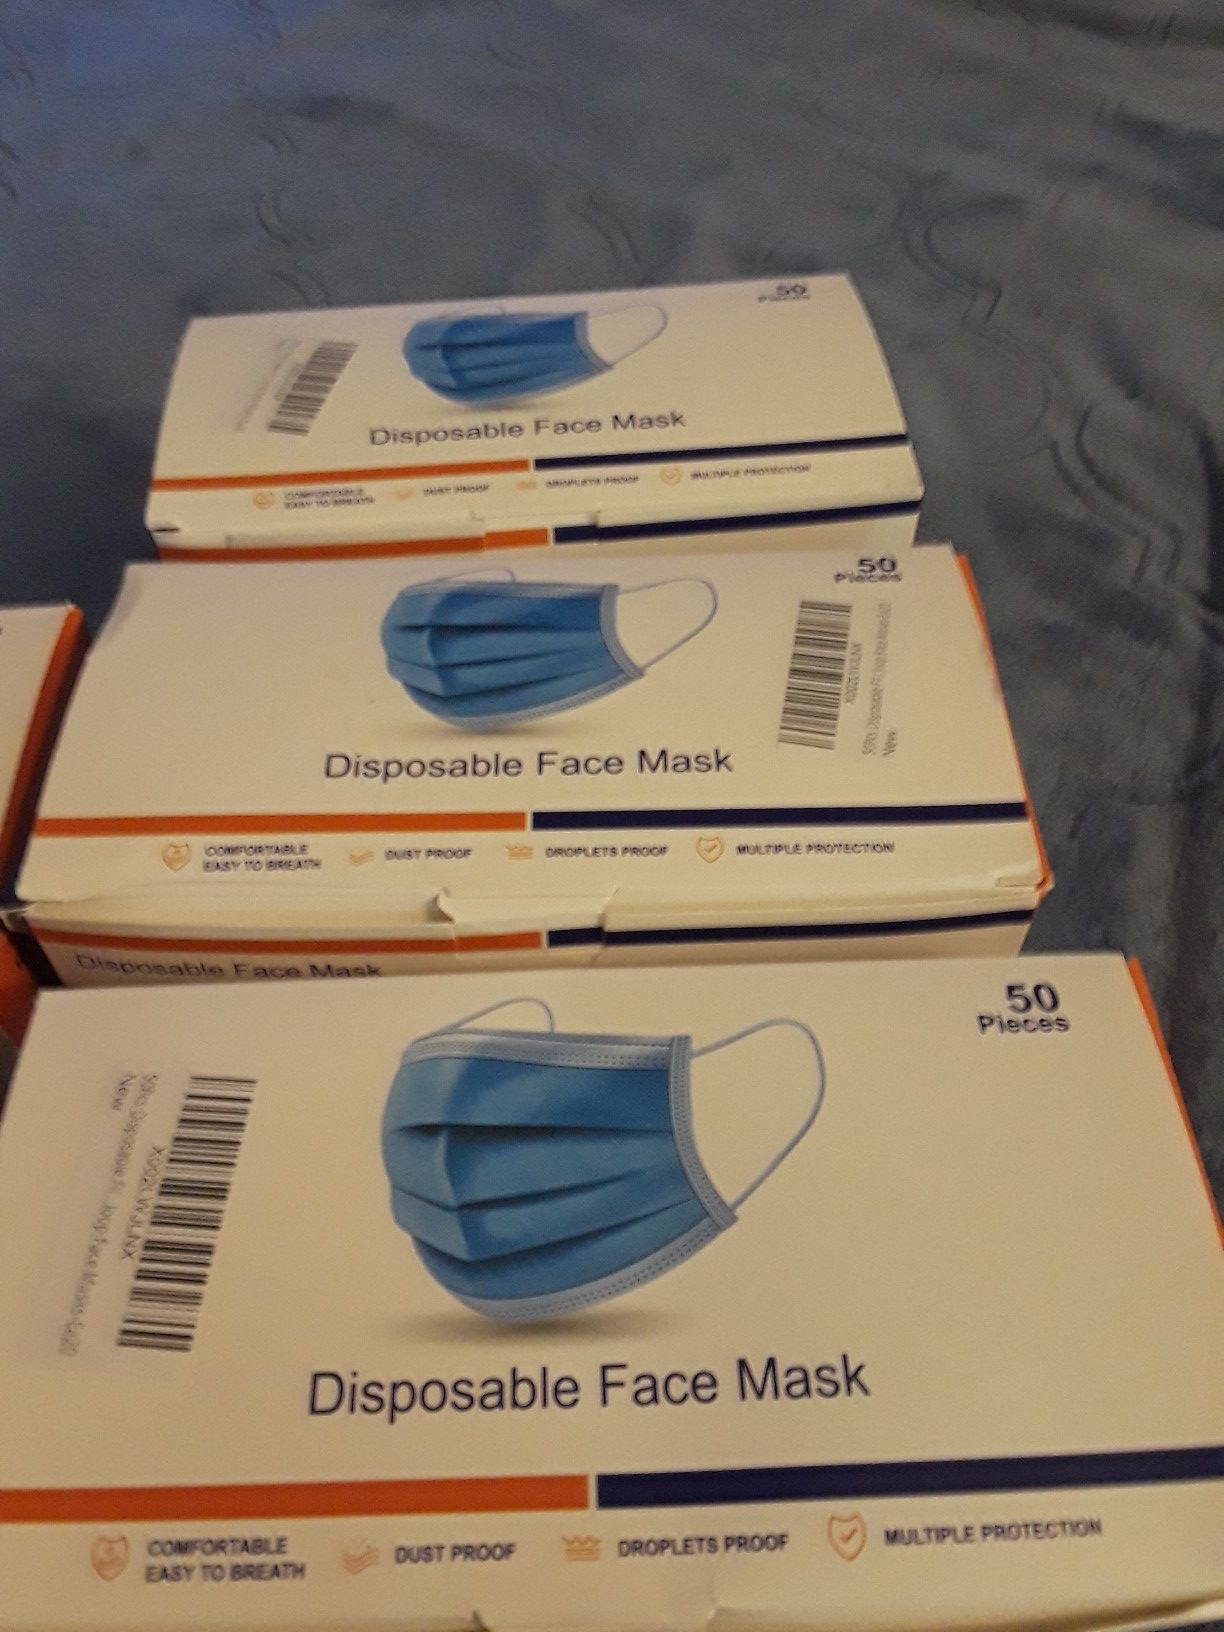 New masks 50 has the package